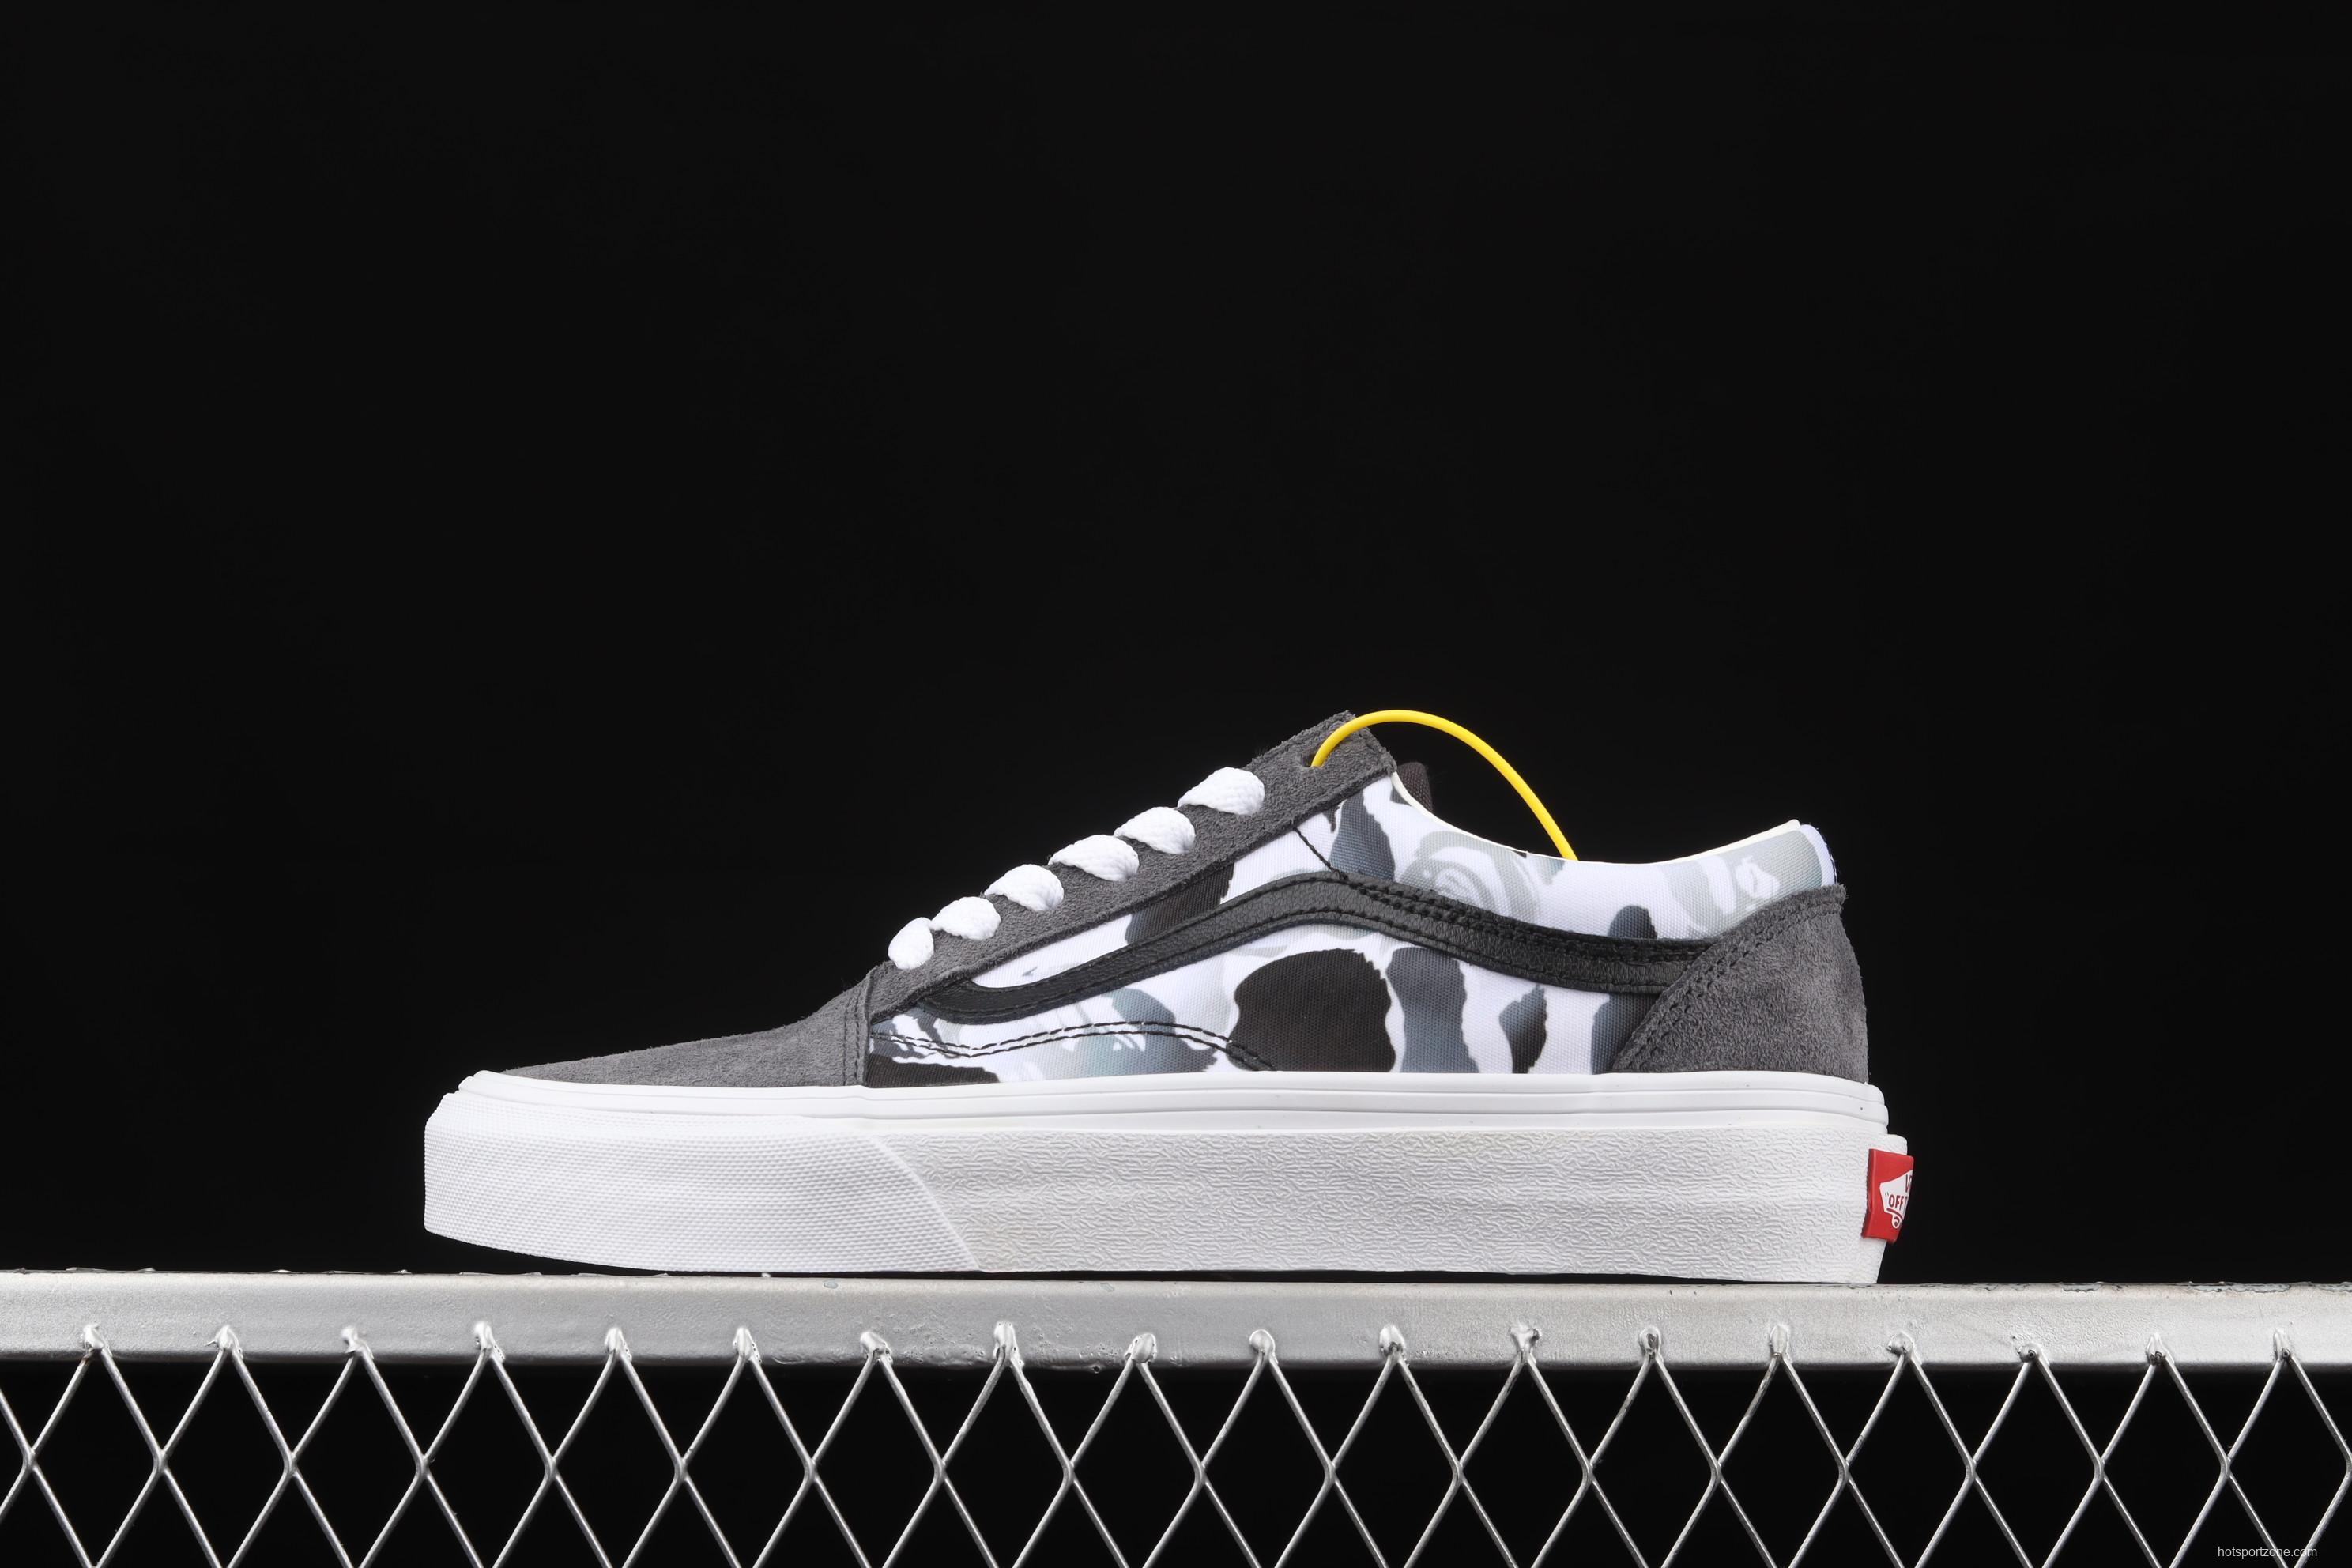 Vans Ward camouflage series low-top casual board shoes VN0A38DMU3I